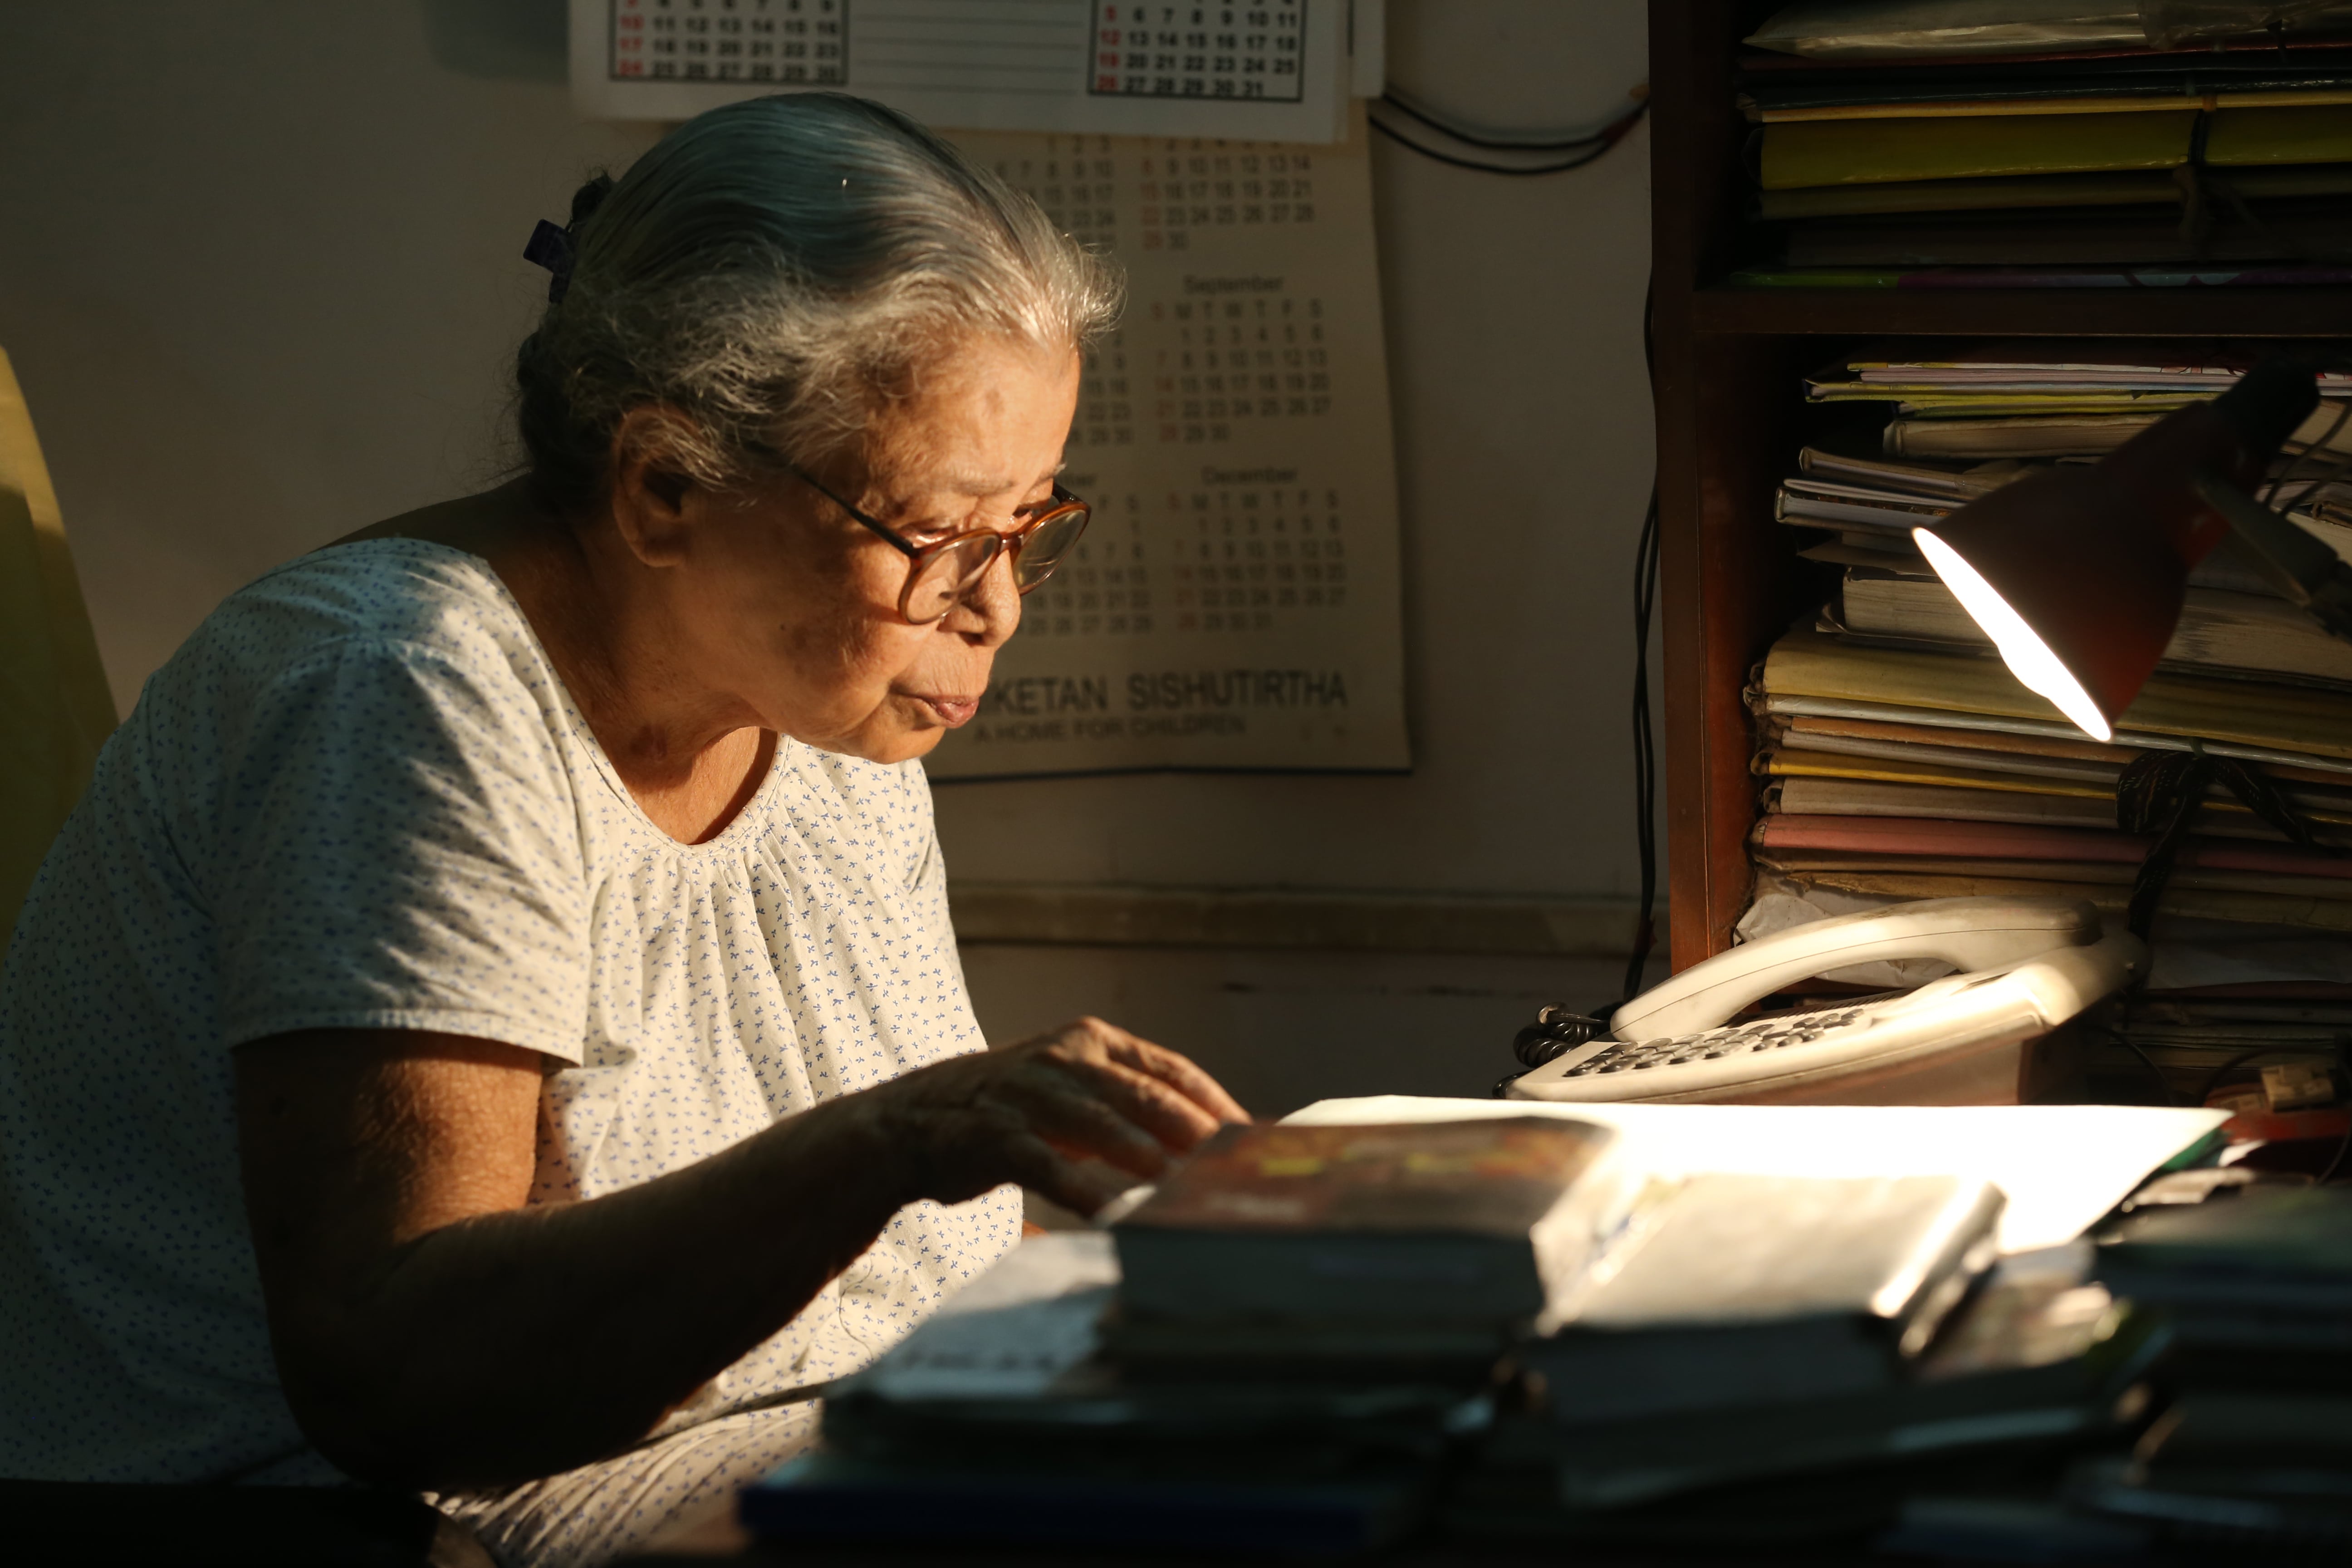 Journeying with Mahasweta Devi – a film that captured the writer’s essence